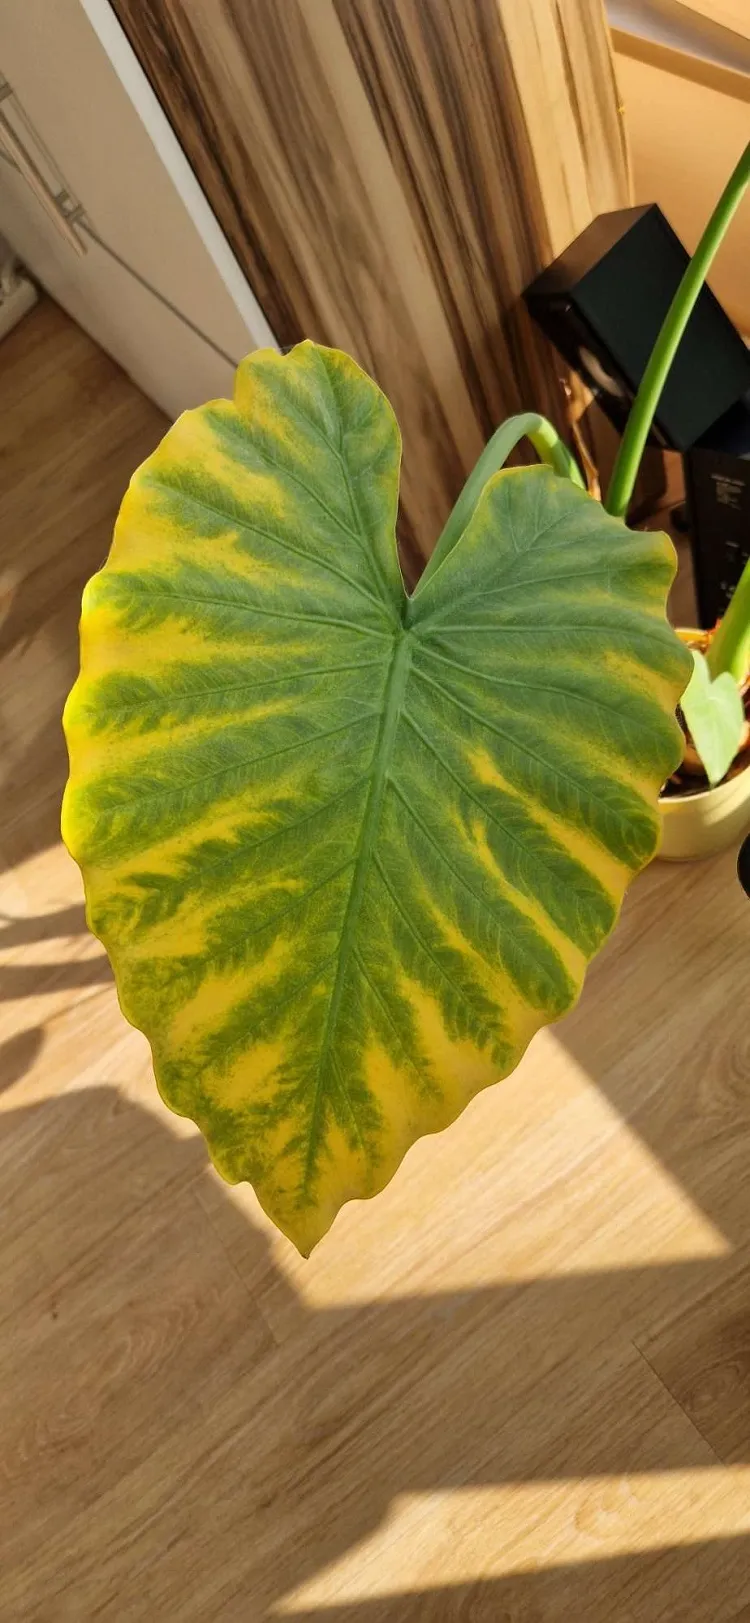 Treatment of causes of houseplant leaves turning yellow